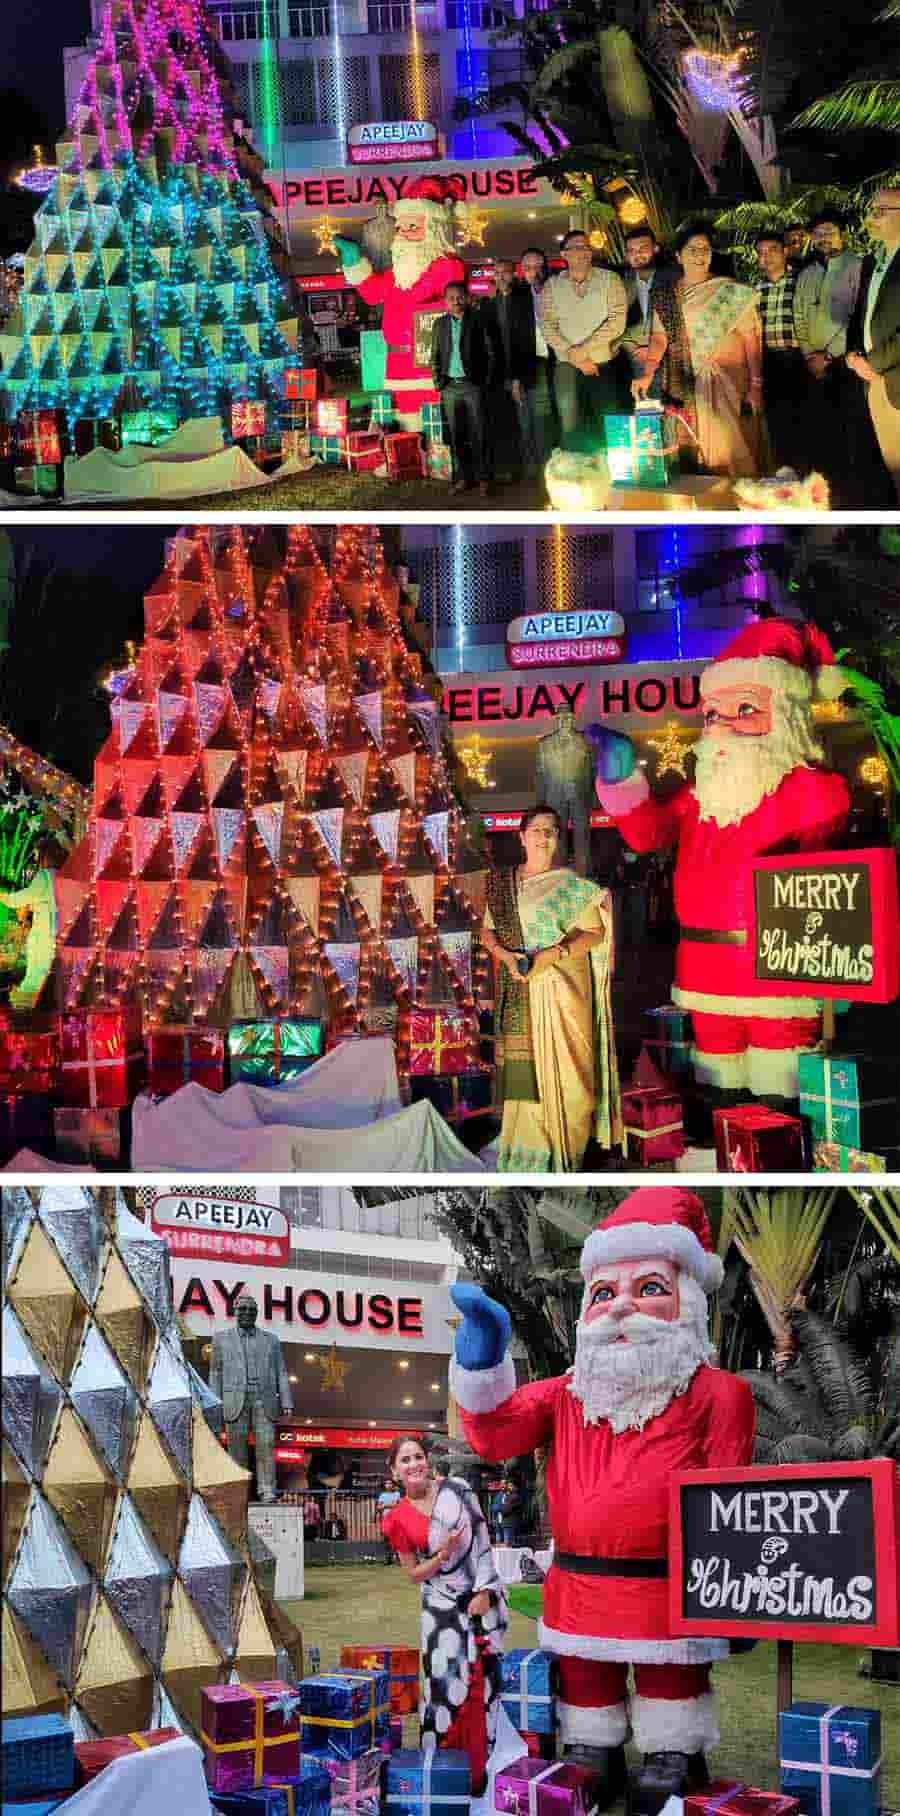 The 30-foot Christmas tree at the Apeejay House lawn at Park Street. Shashi Panja inaugurated the exhibit. Tollywood actor Trina Saha was also present. The installations at the venue will remain open for public viewing till January 3, 2023